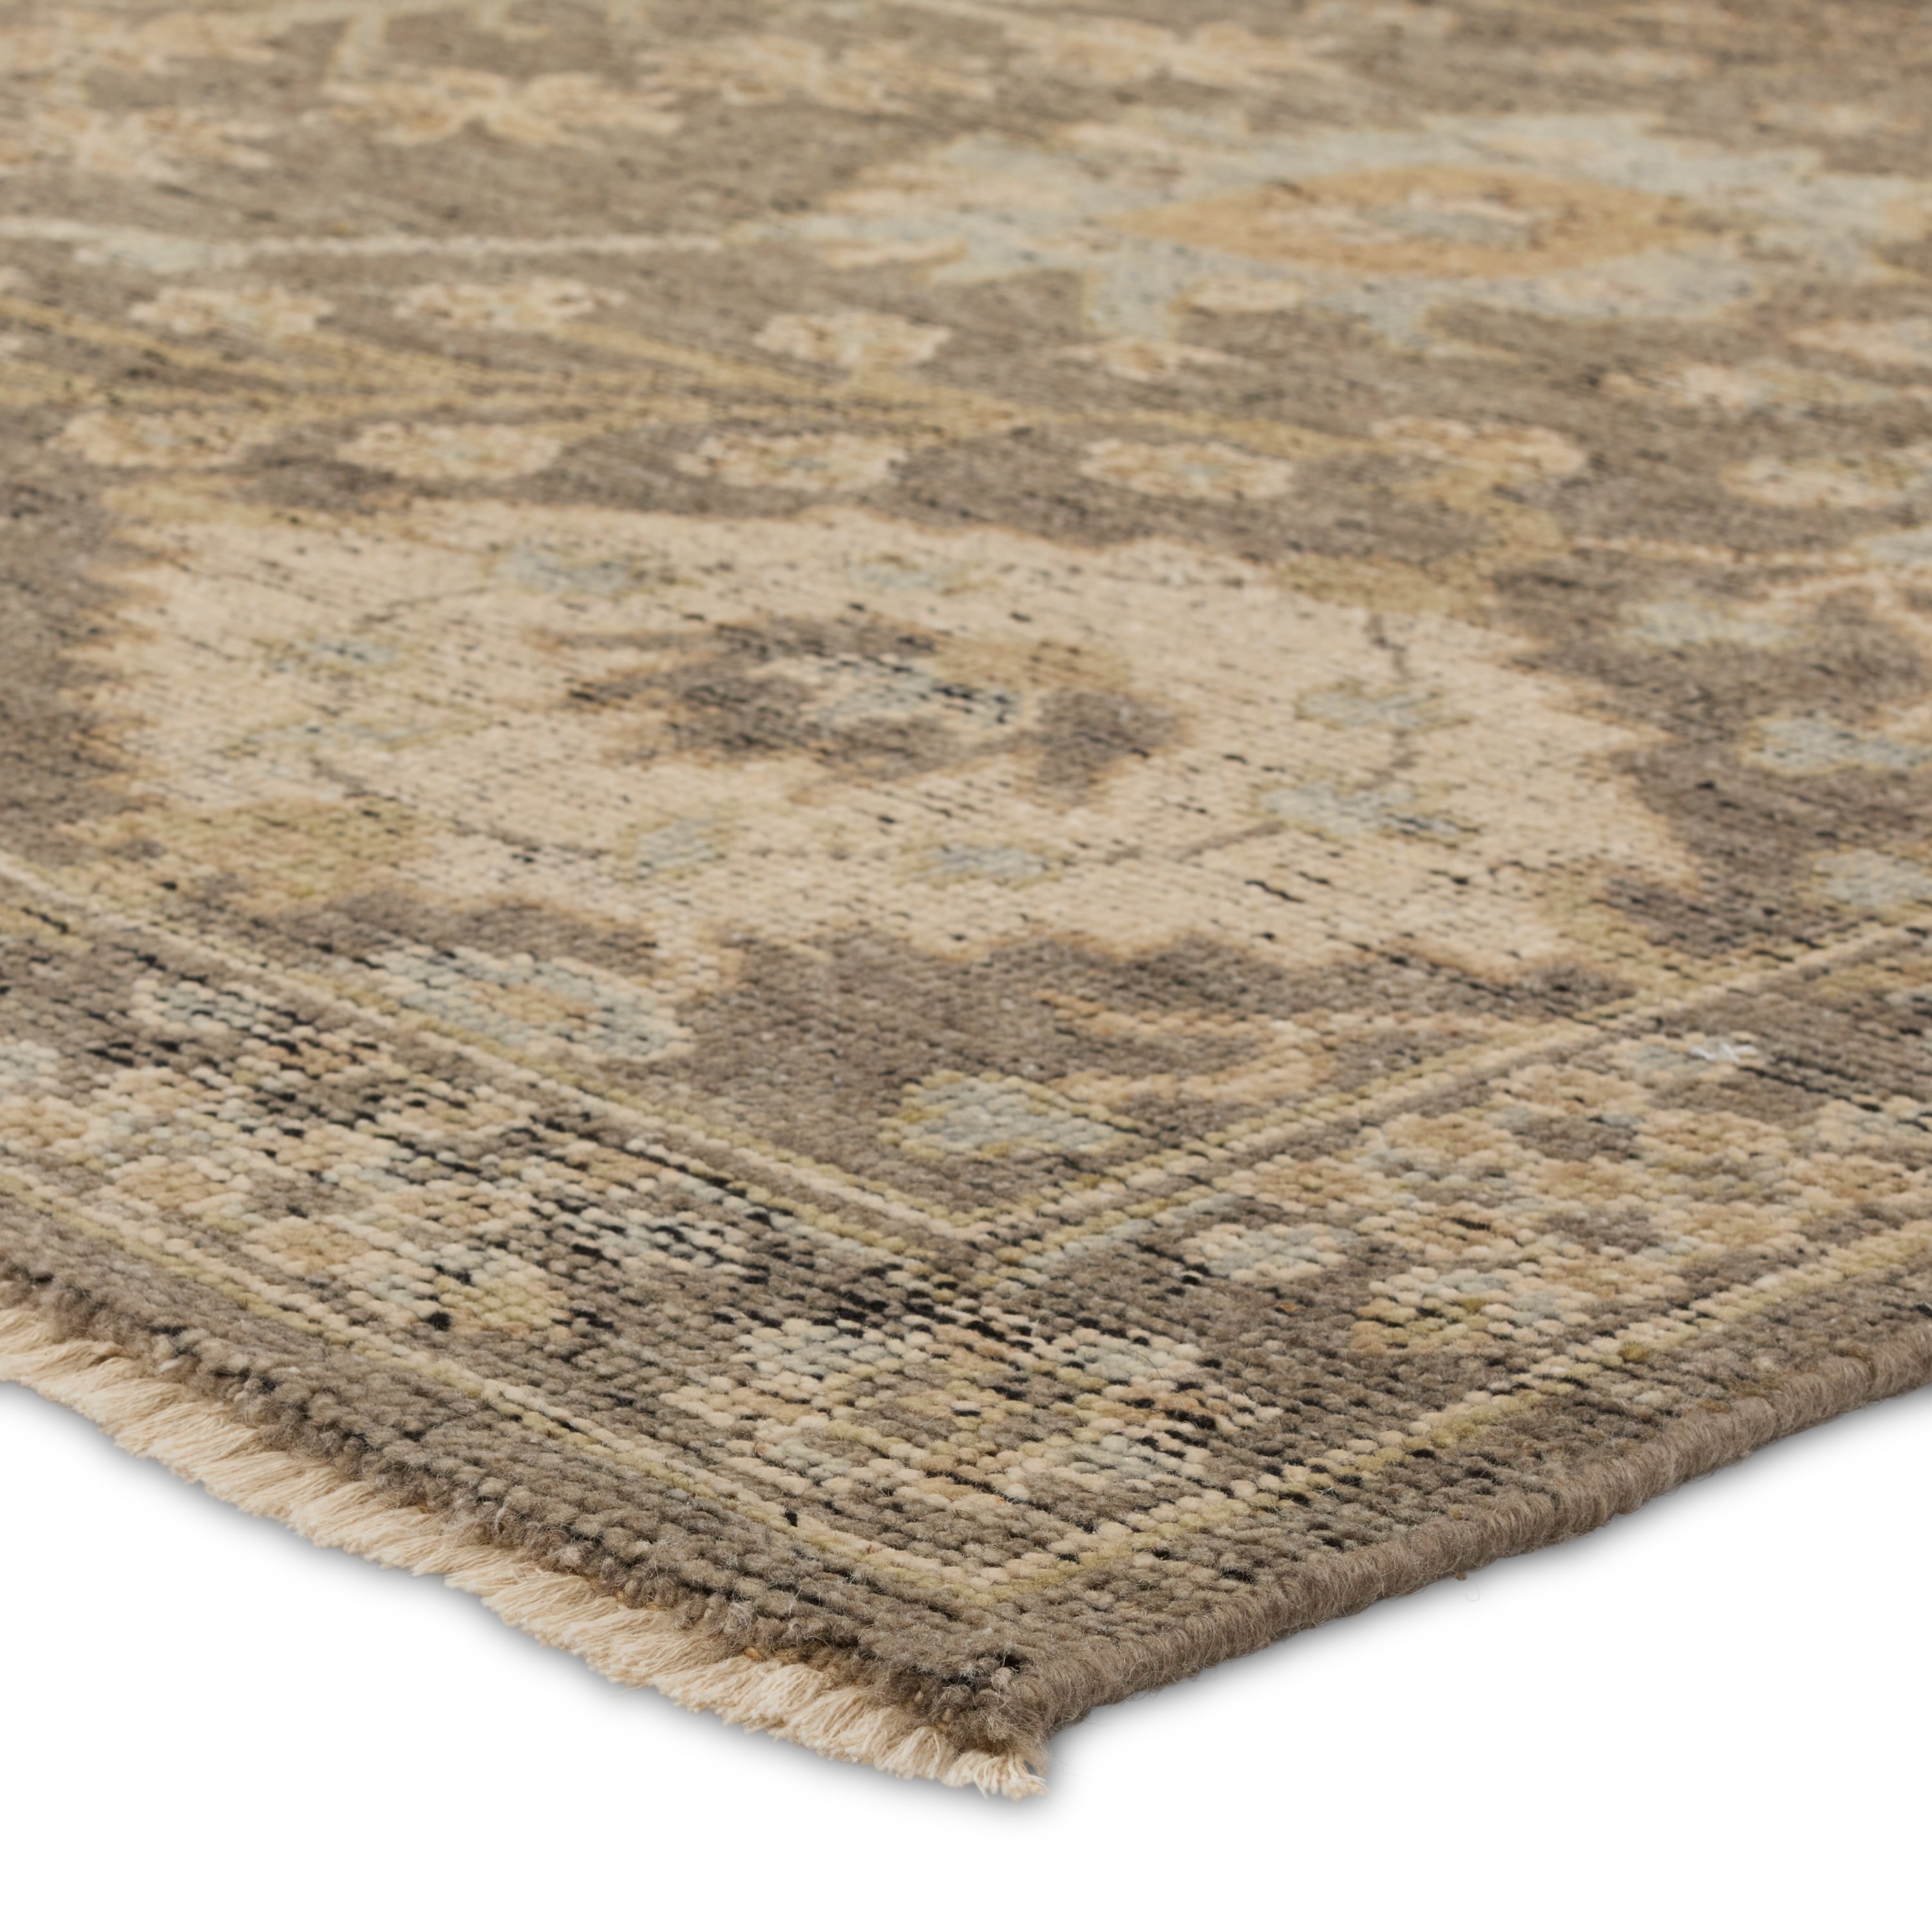 The Rhapsody collection features heirloom-quality designs of stunningly abrashed Old World patterns. The Maeli area rug boasts a beautifully washed Oushak motif with a decorative border. The gray tones are accented with cream, black, brown, and green hues for added depth and intrigue. This durable wool handknot anchors living spaces with a fresh take on vintage style. Amethyst Home provides interior design, new construction, custom furniture, and area rugs in the Miami metro area.